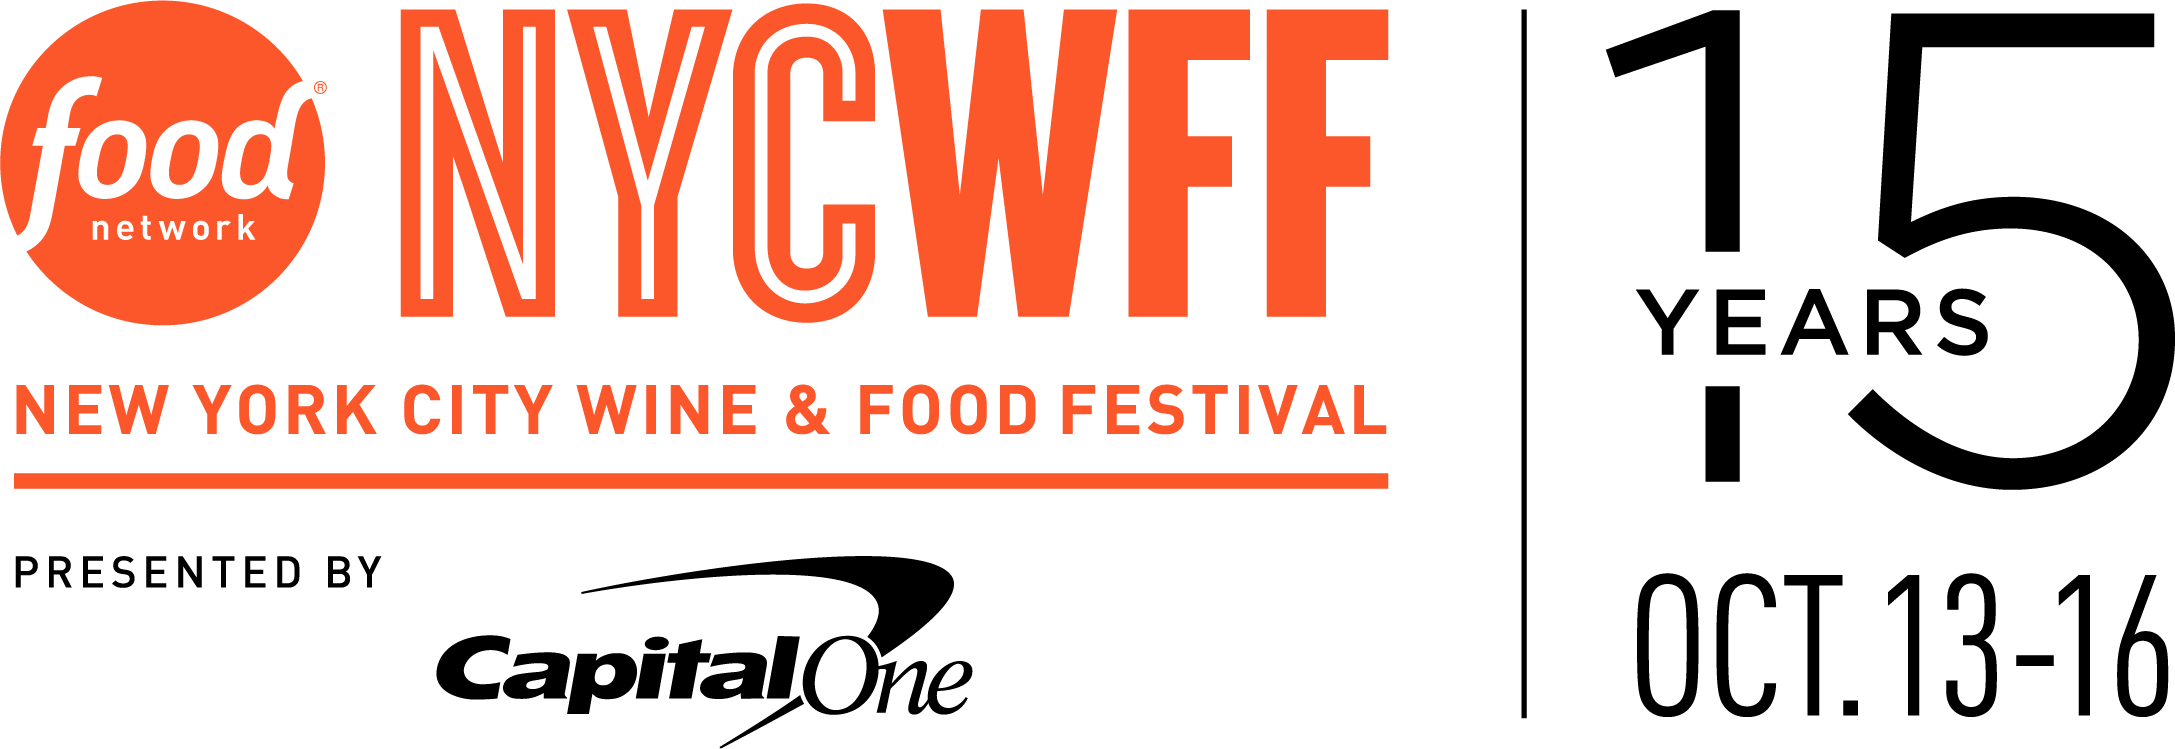 New York City Wine & Food Festival - NYCWFF - Schedule 2022